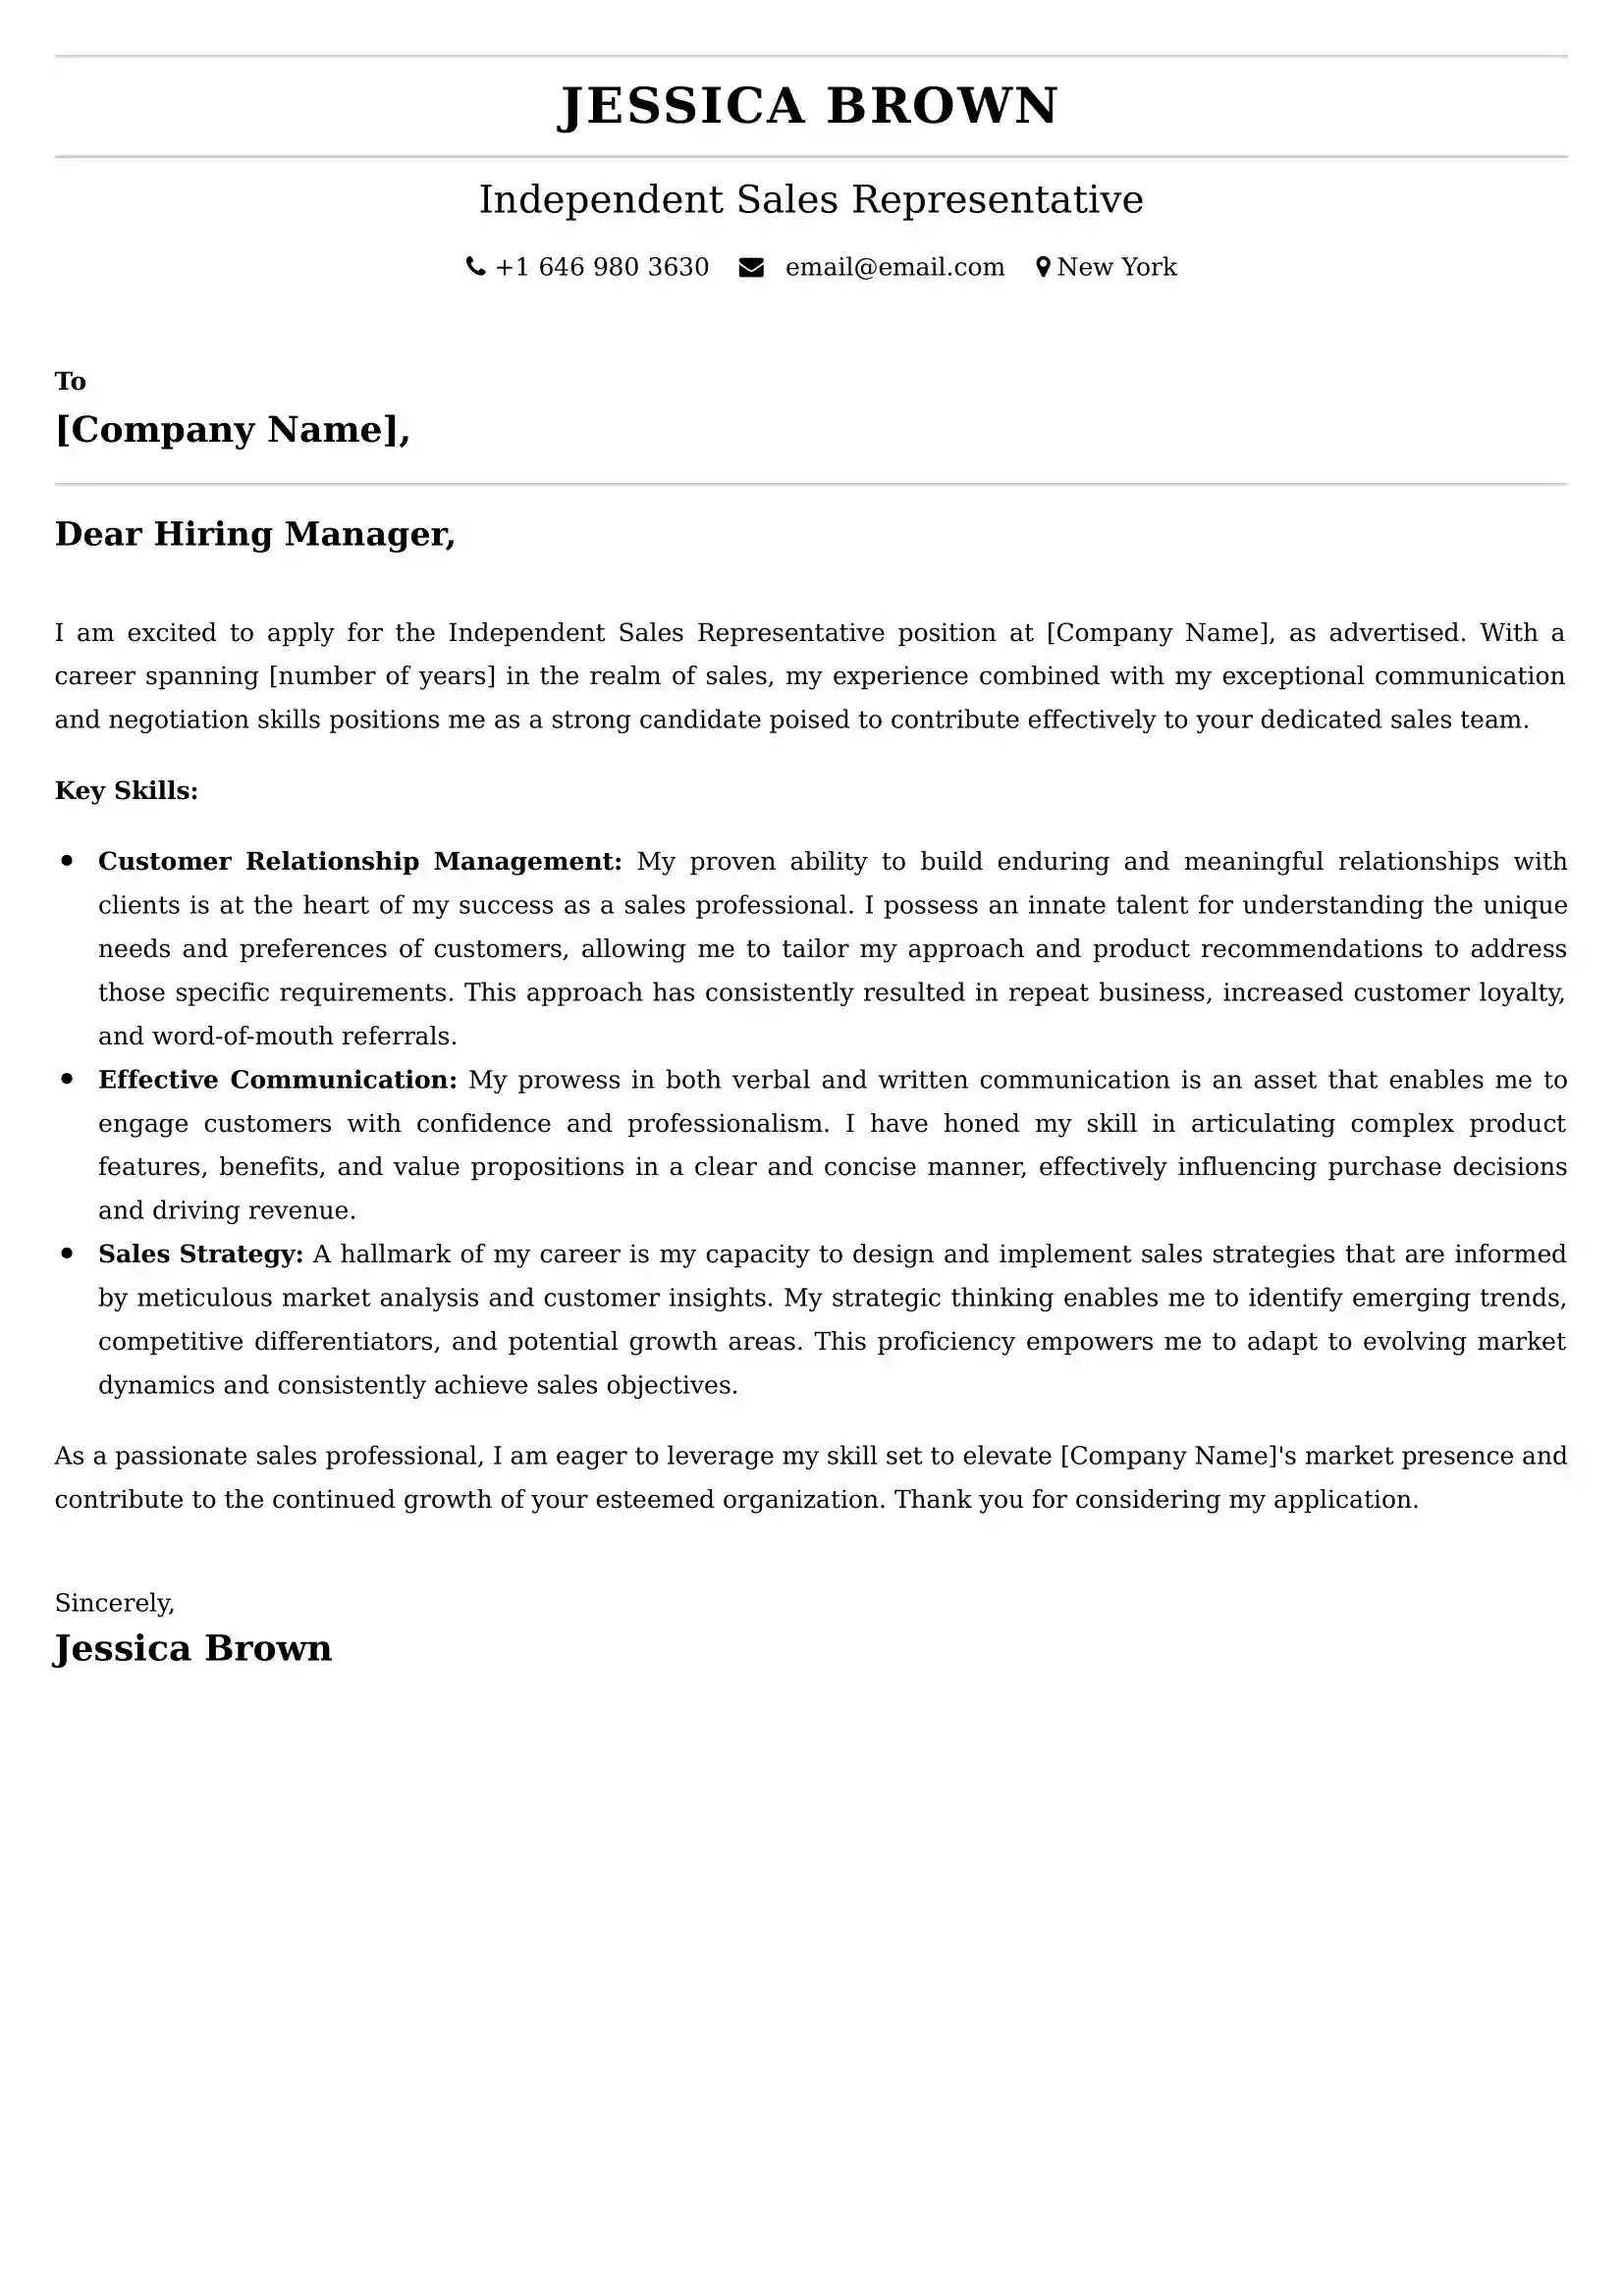 Independent Sales Representative Cover Letter Examples - Latest UK Format